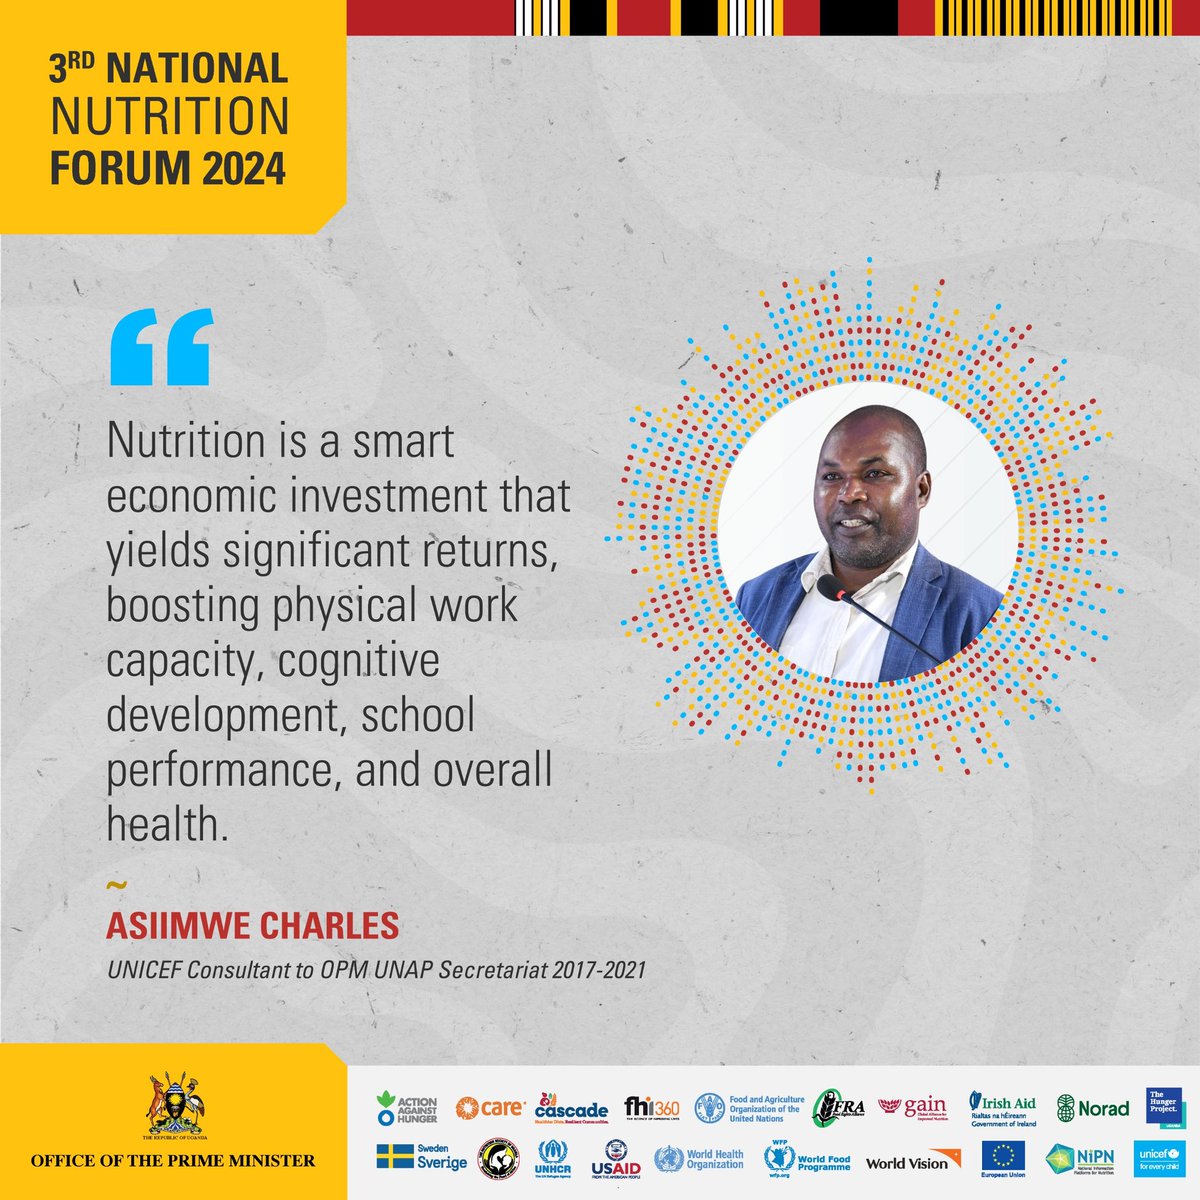 Good nutrition is the bedrock of child survival and development. #NationalNutritionForum2024